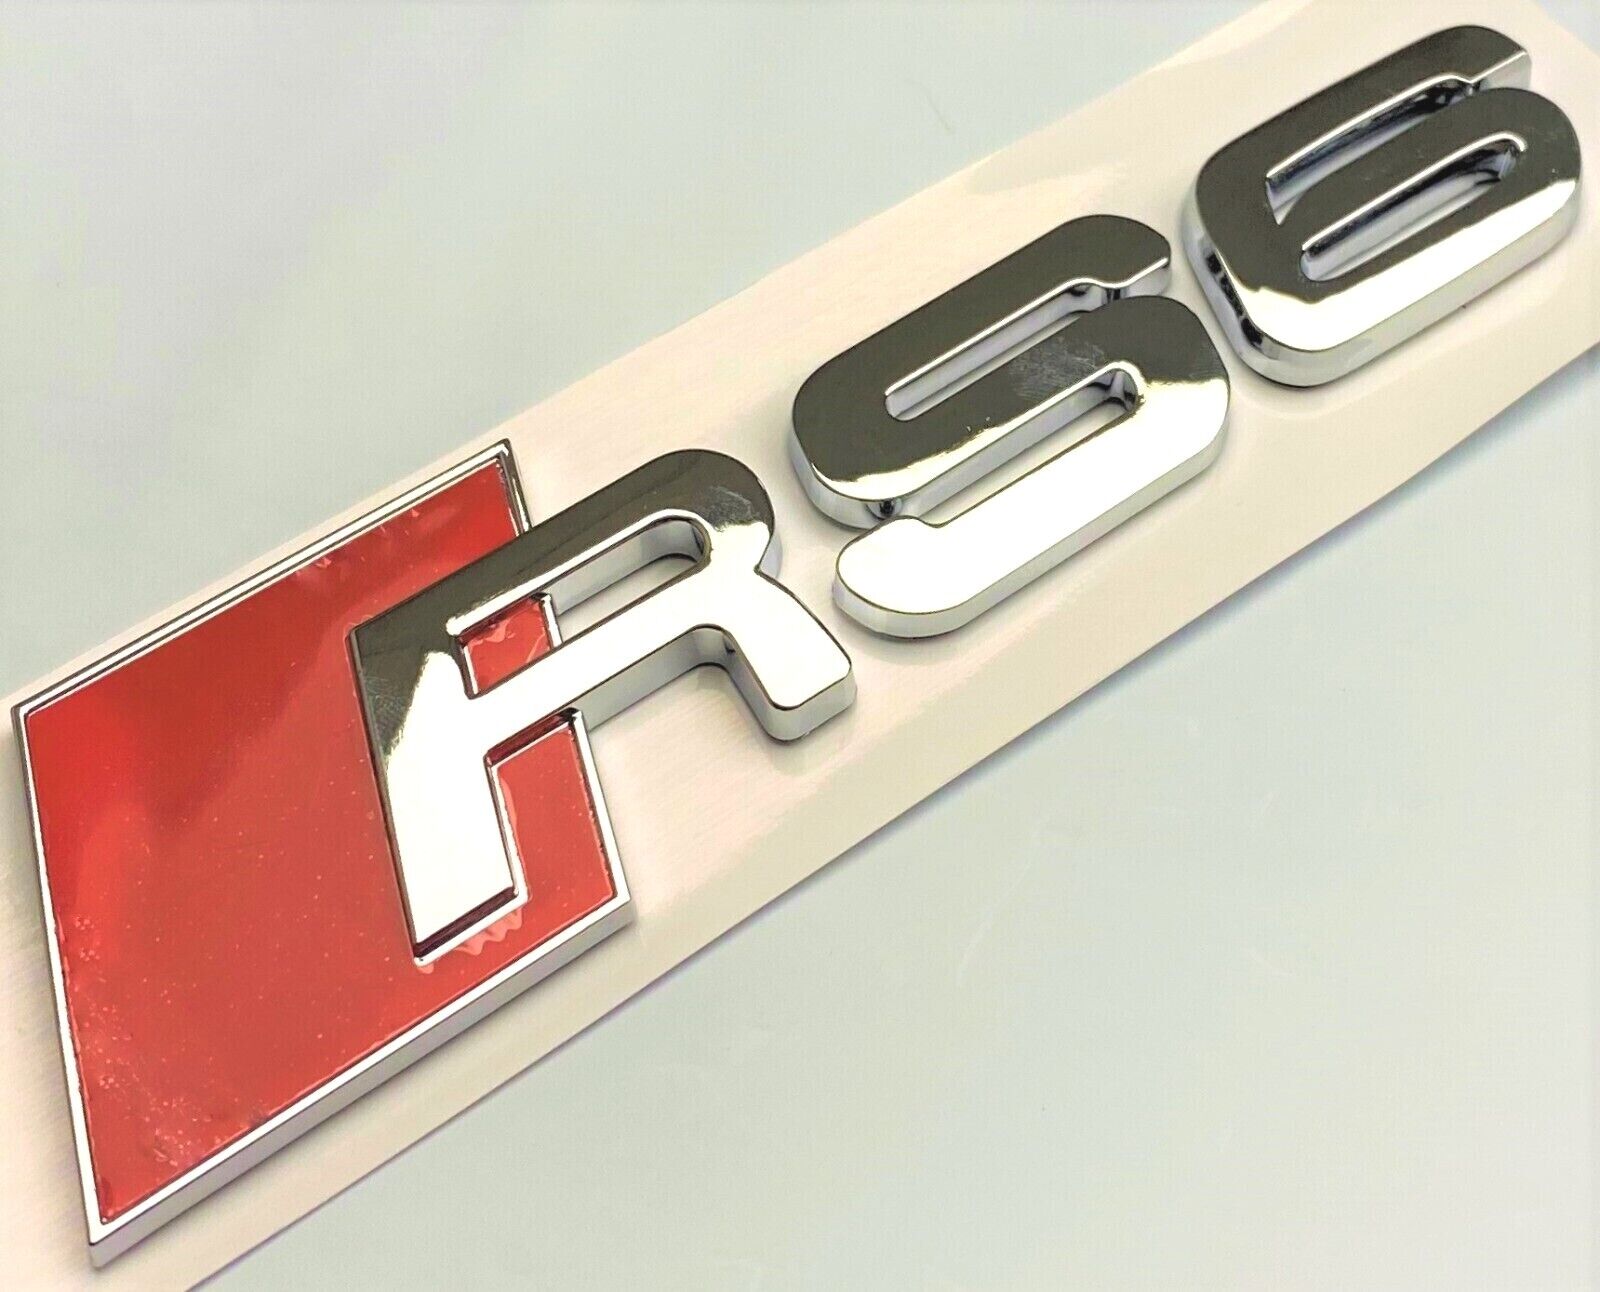 CHROME RS6 FIT AUDI RS6 REAR TRUNK EMBLEM BADGE NAME DECAL LETTER NUMBER